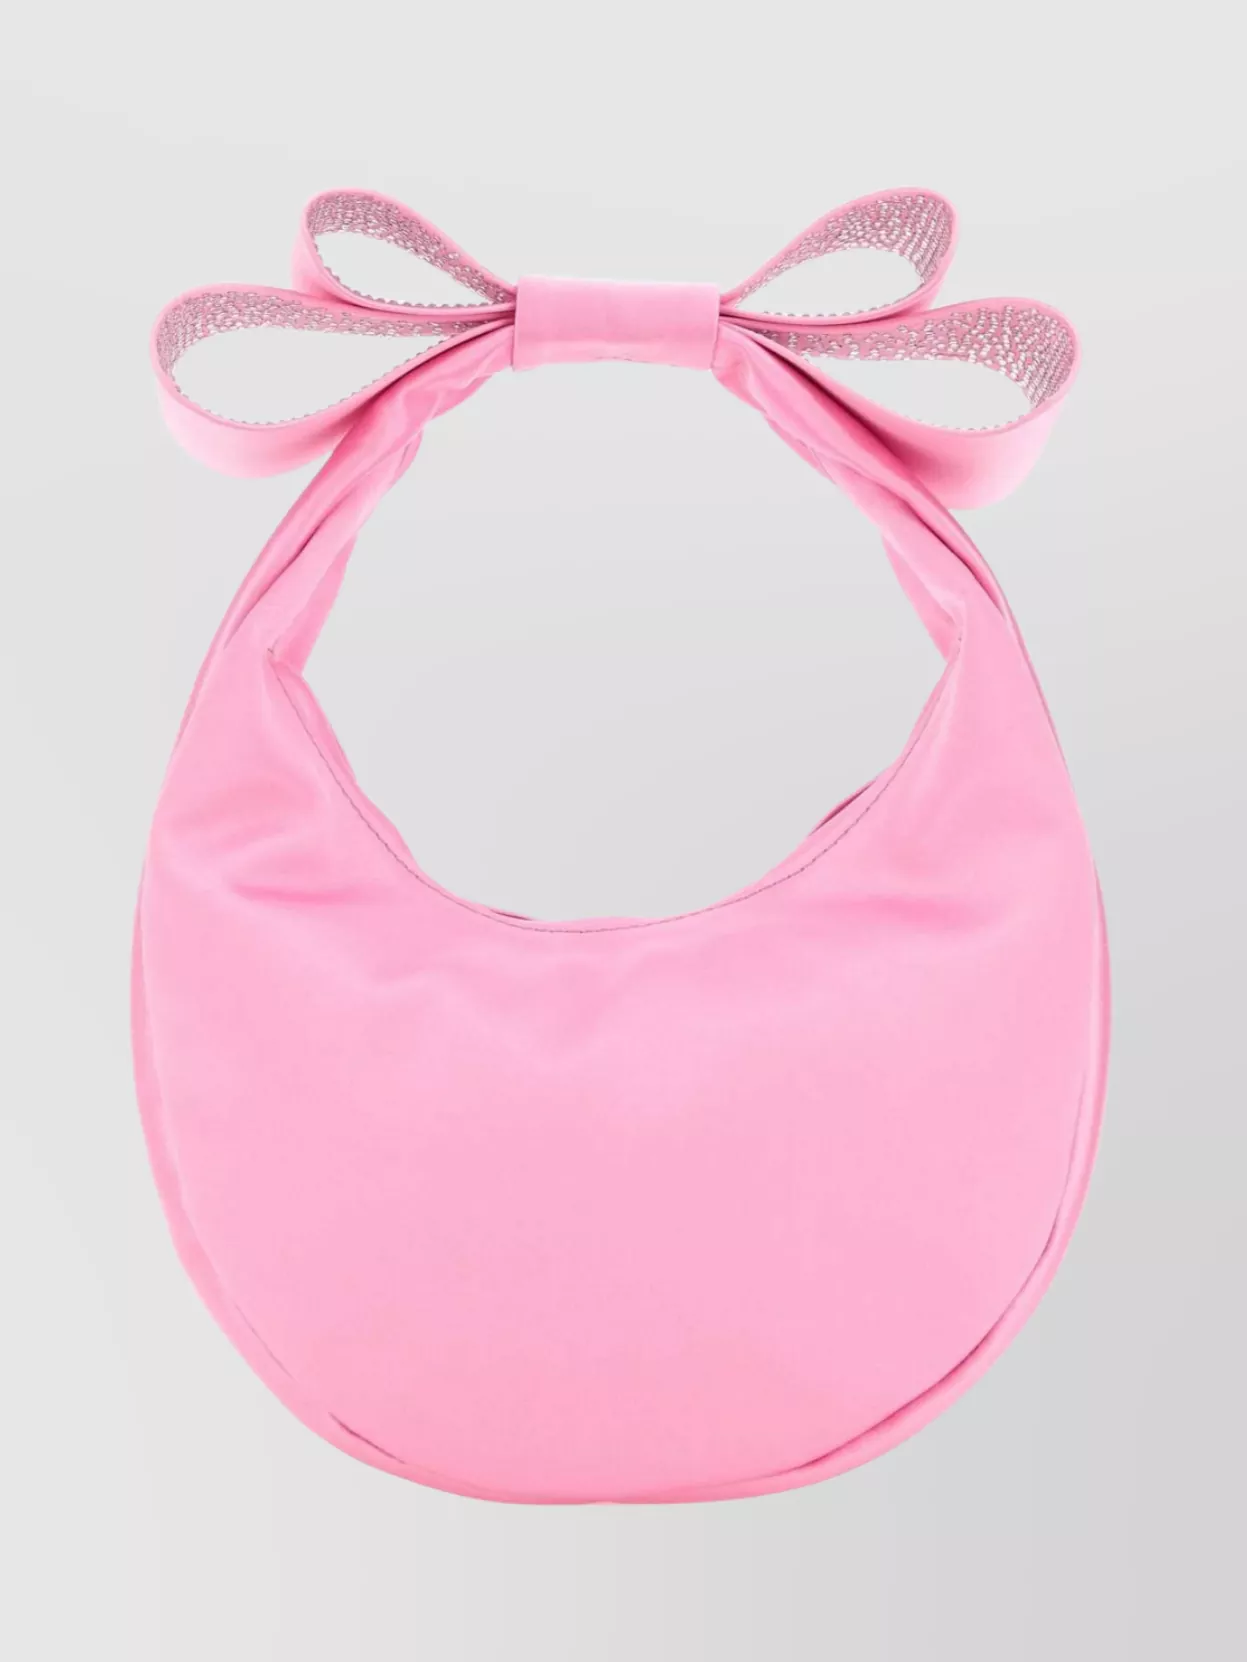 Mach & Mach Small Bow Satin Top-handle Bag In Pink